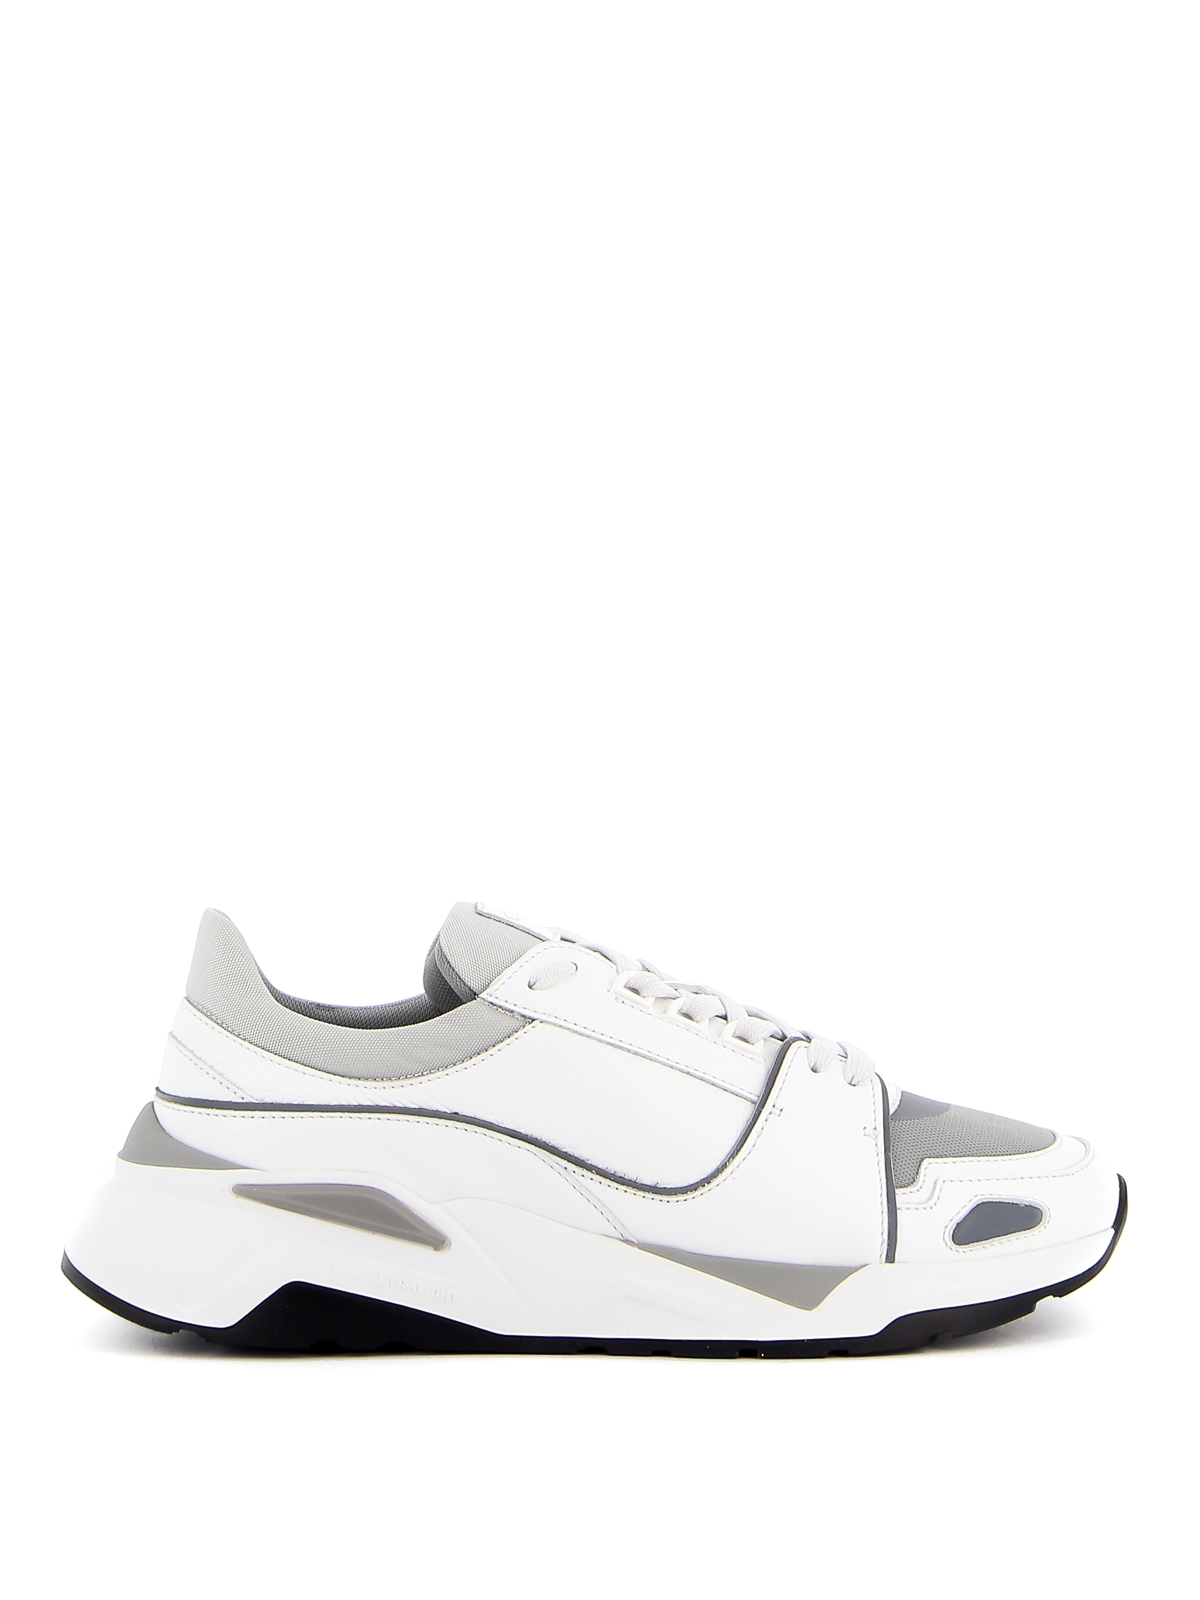 CANALI GRAINED LEATHER LACE-UP SNEAKERS